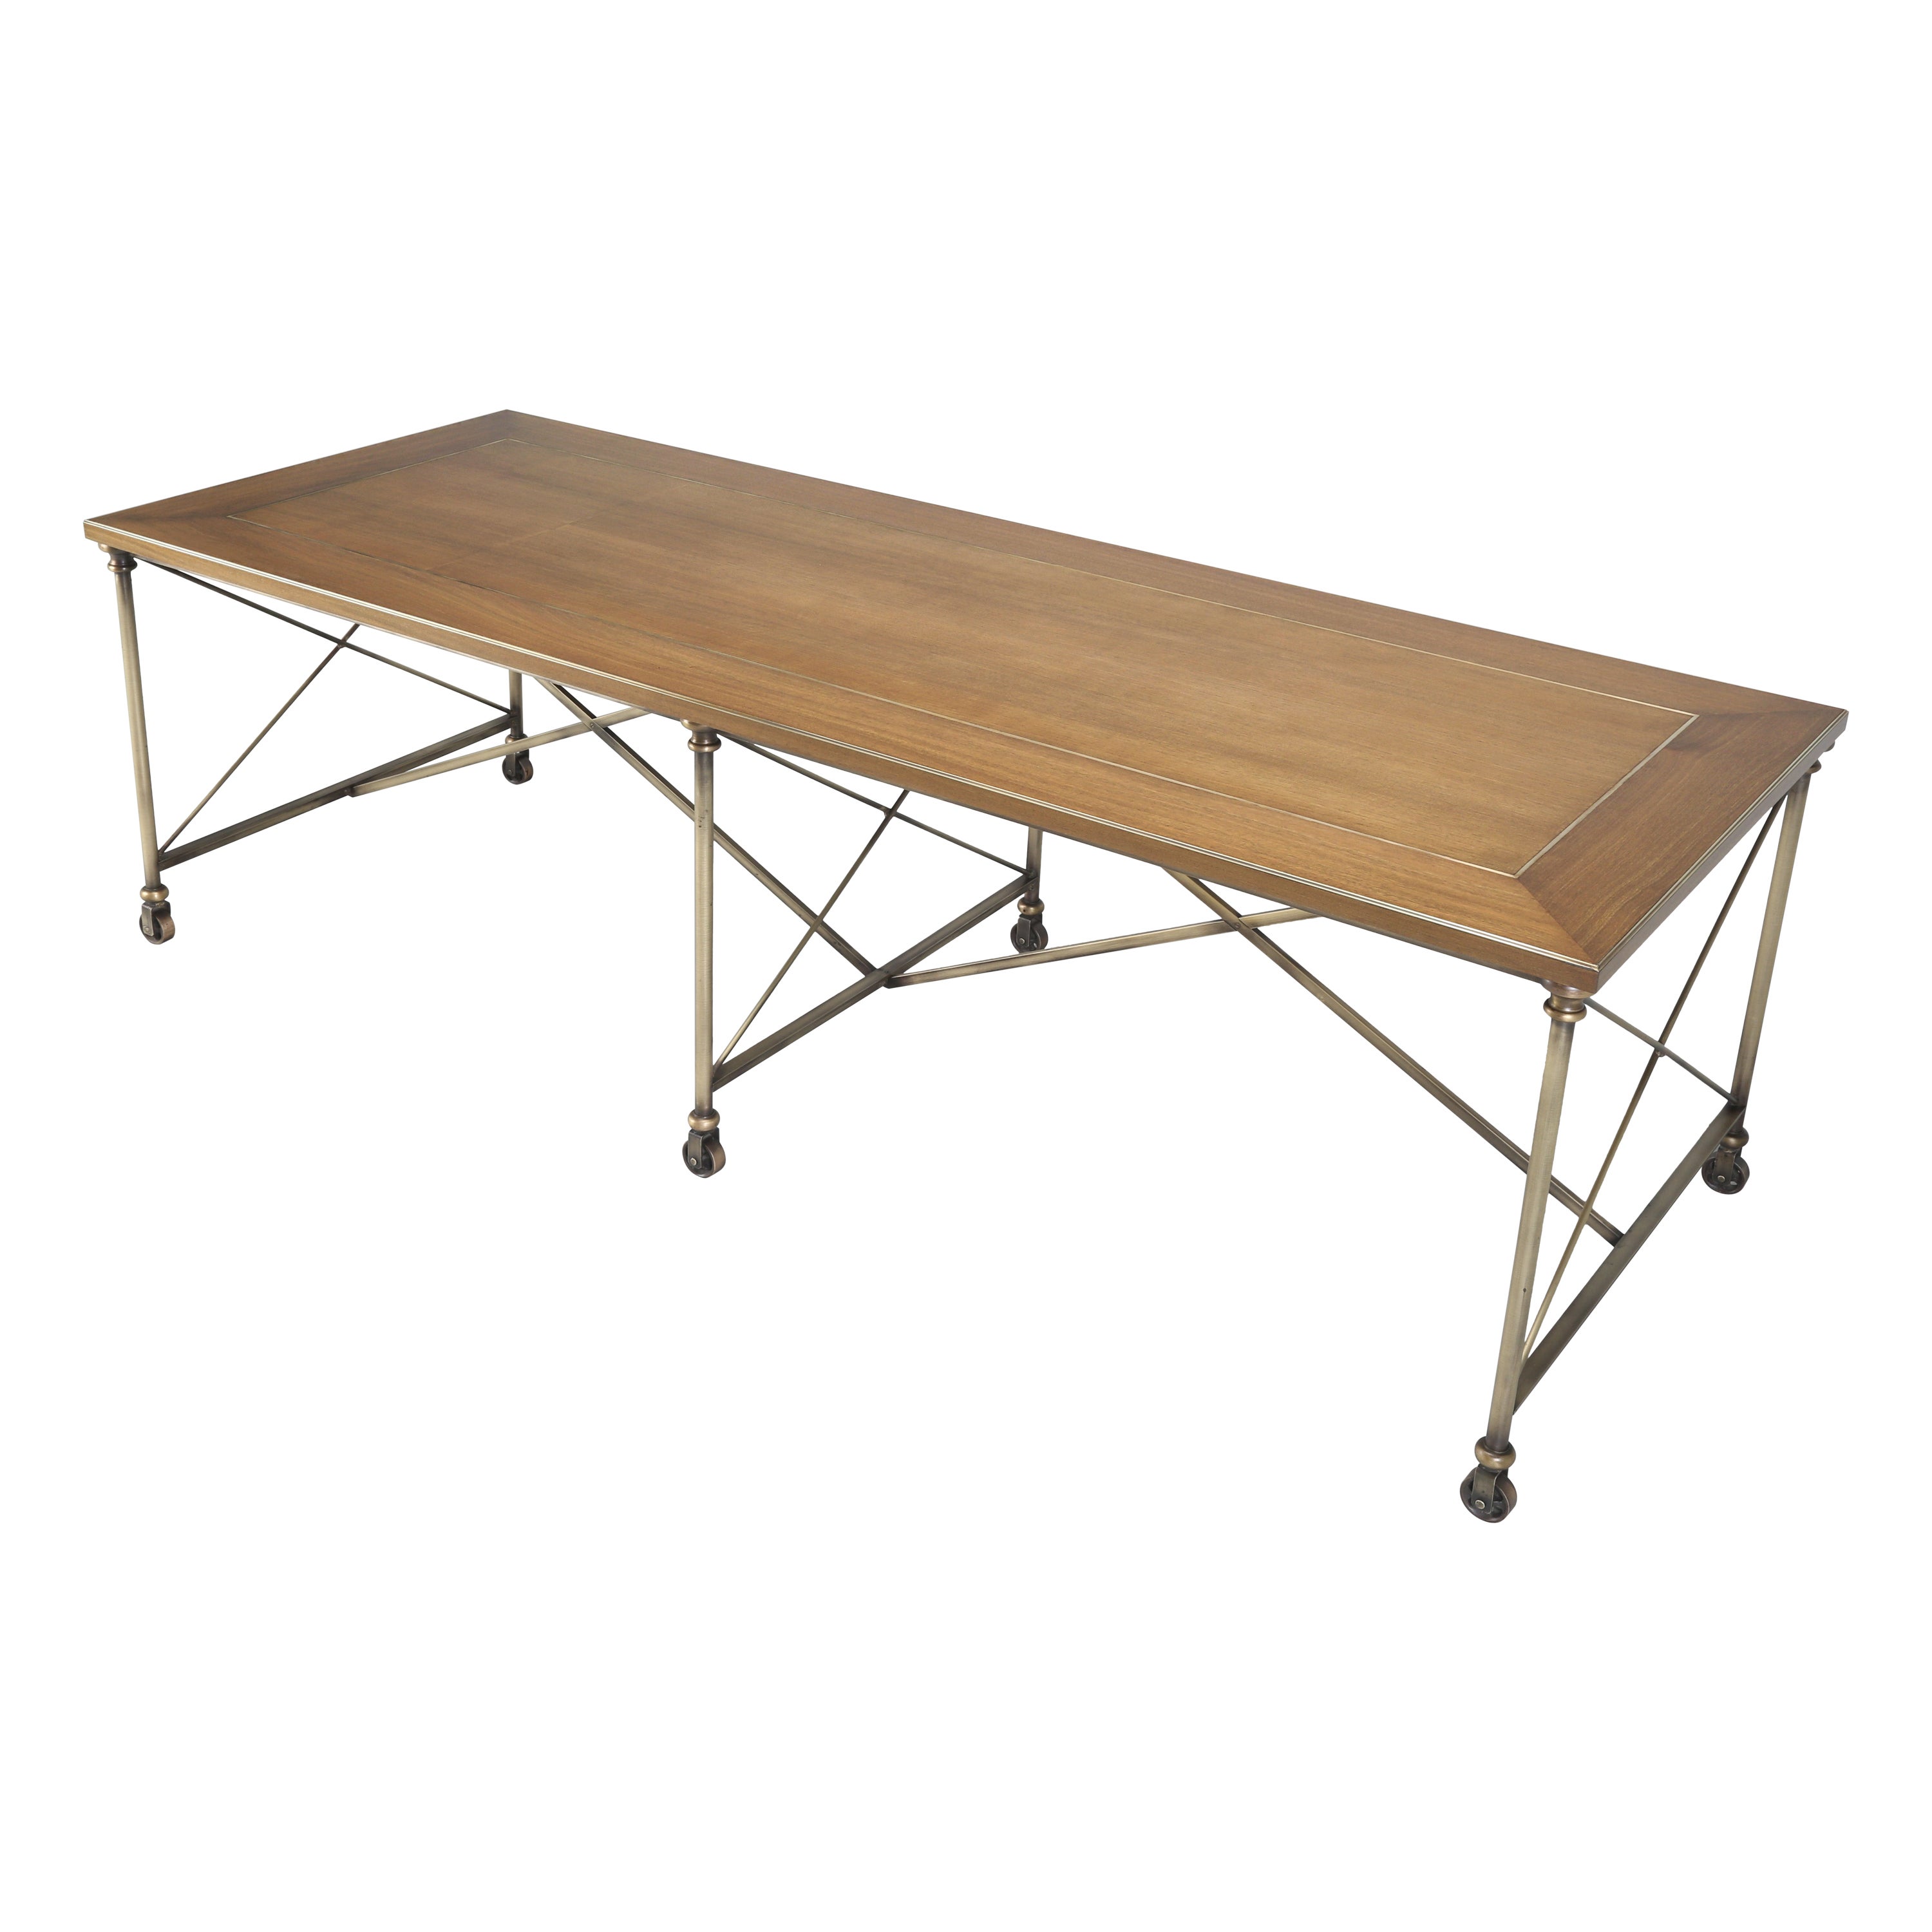  Old Plank Industrial Inspired Dining Table Bronze Brass and Walnut in Any Size